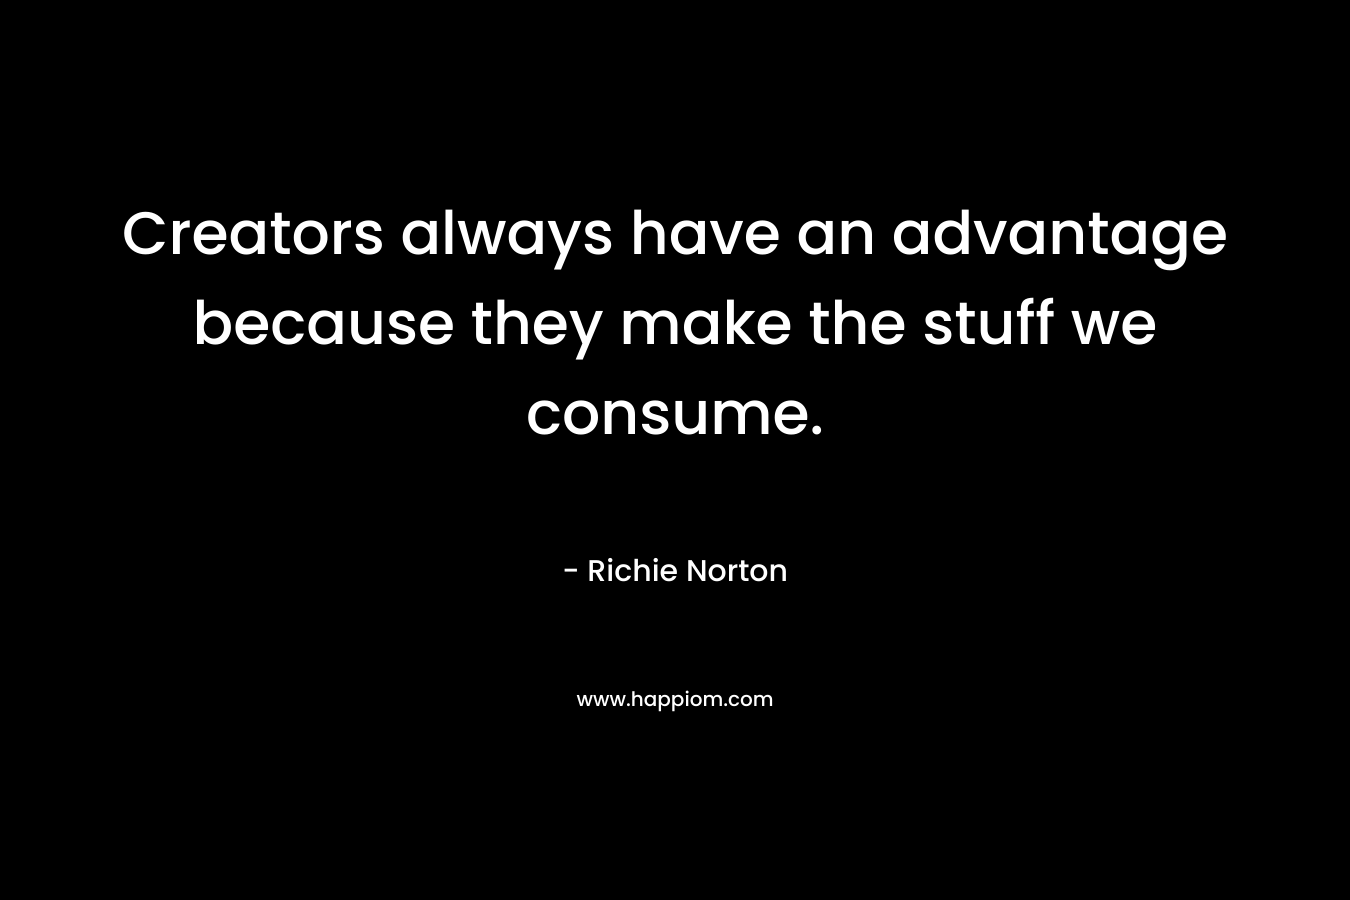 Creators always have an advantage because they make the stuff we consume.